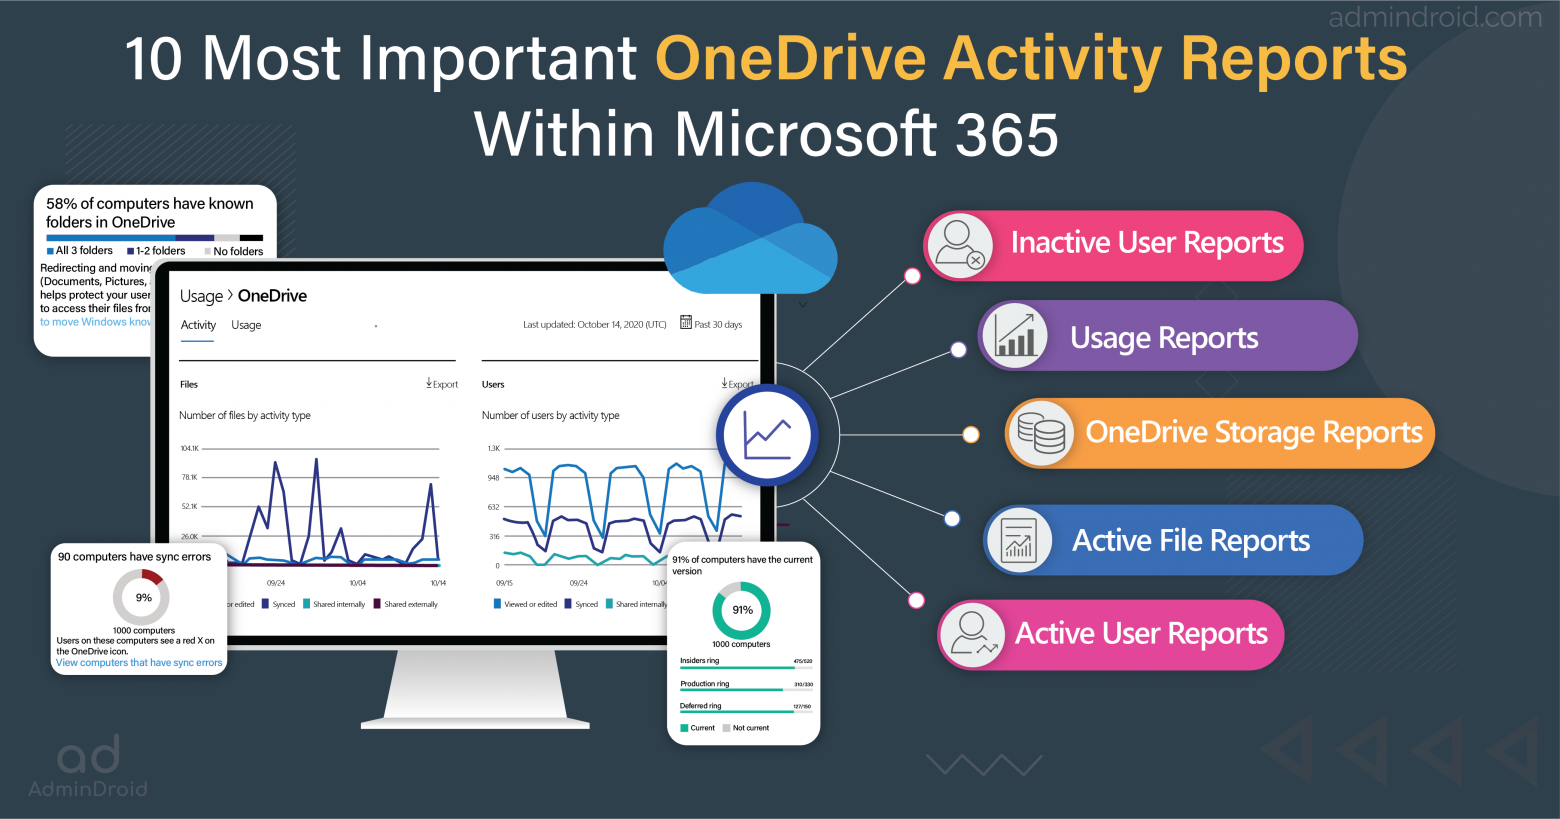 10 Most Important OneDrive Activity Reports Within Microsoft 365